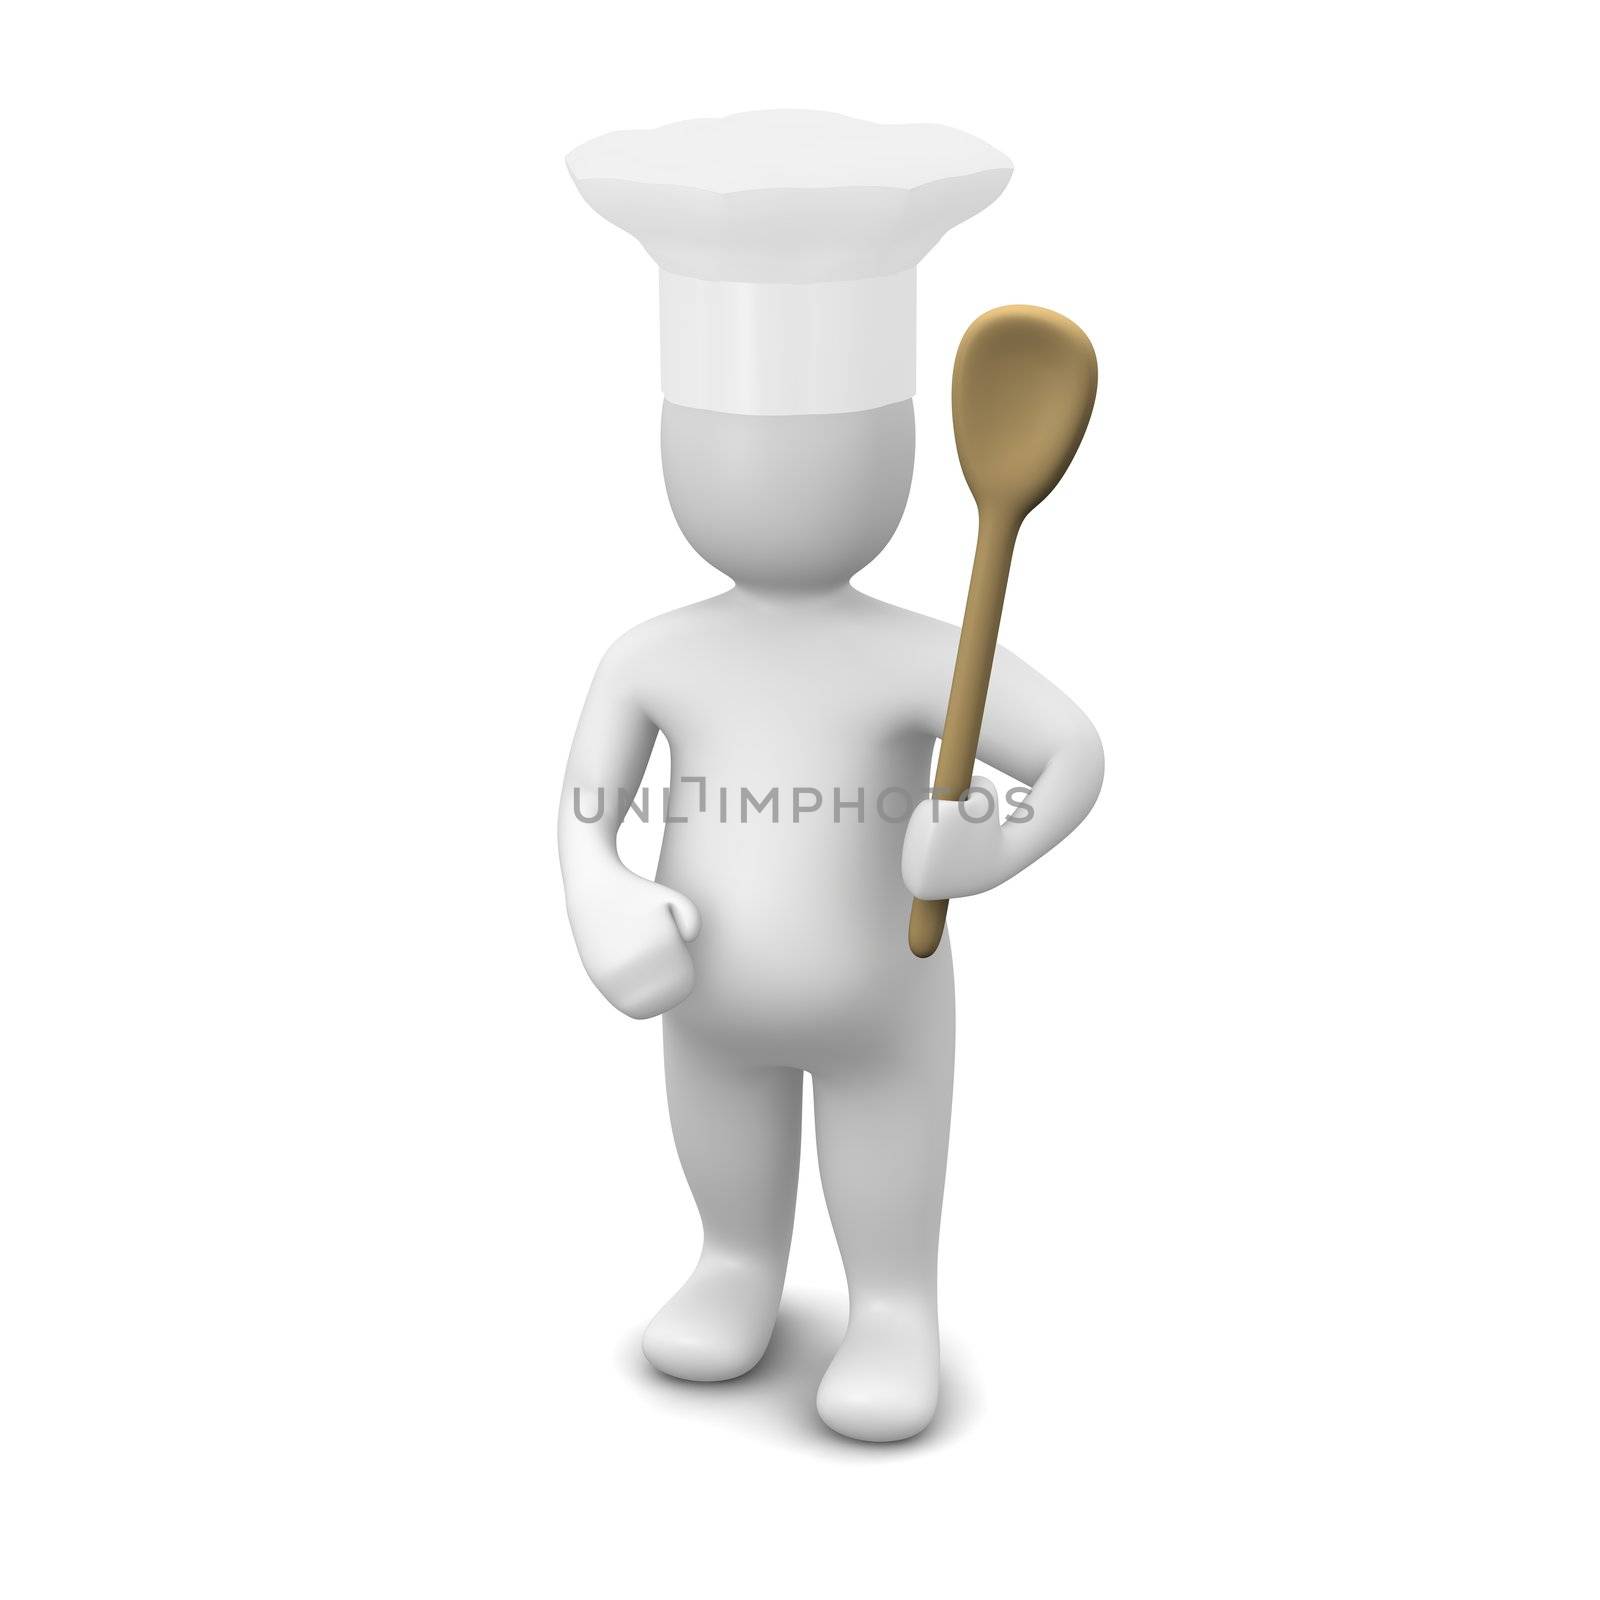 Cook with spoon. 3d rendered illustration isolated on white.